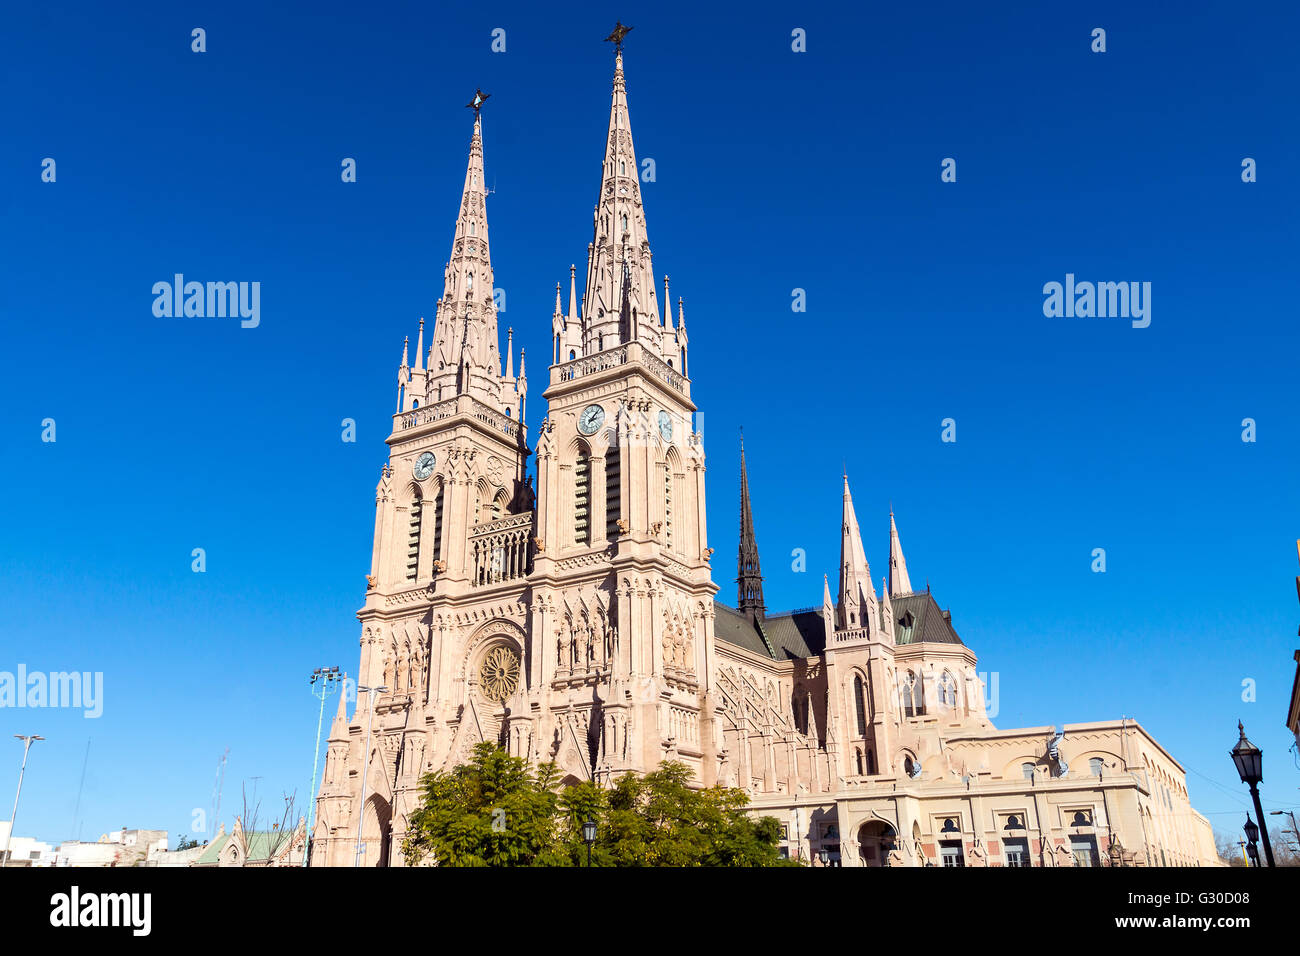 The famous cathedral of Lujan in the province of Buenos Aires, Argentina Stock Photo